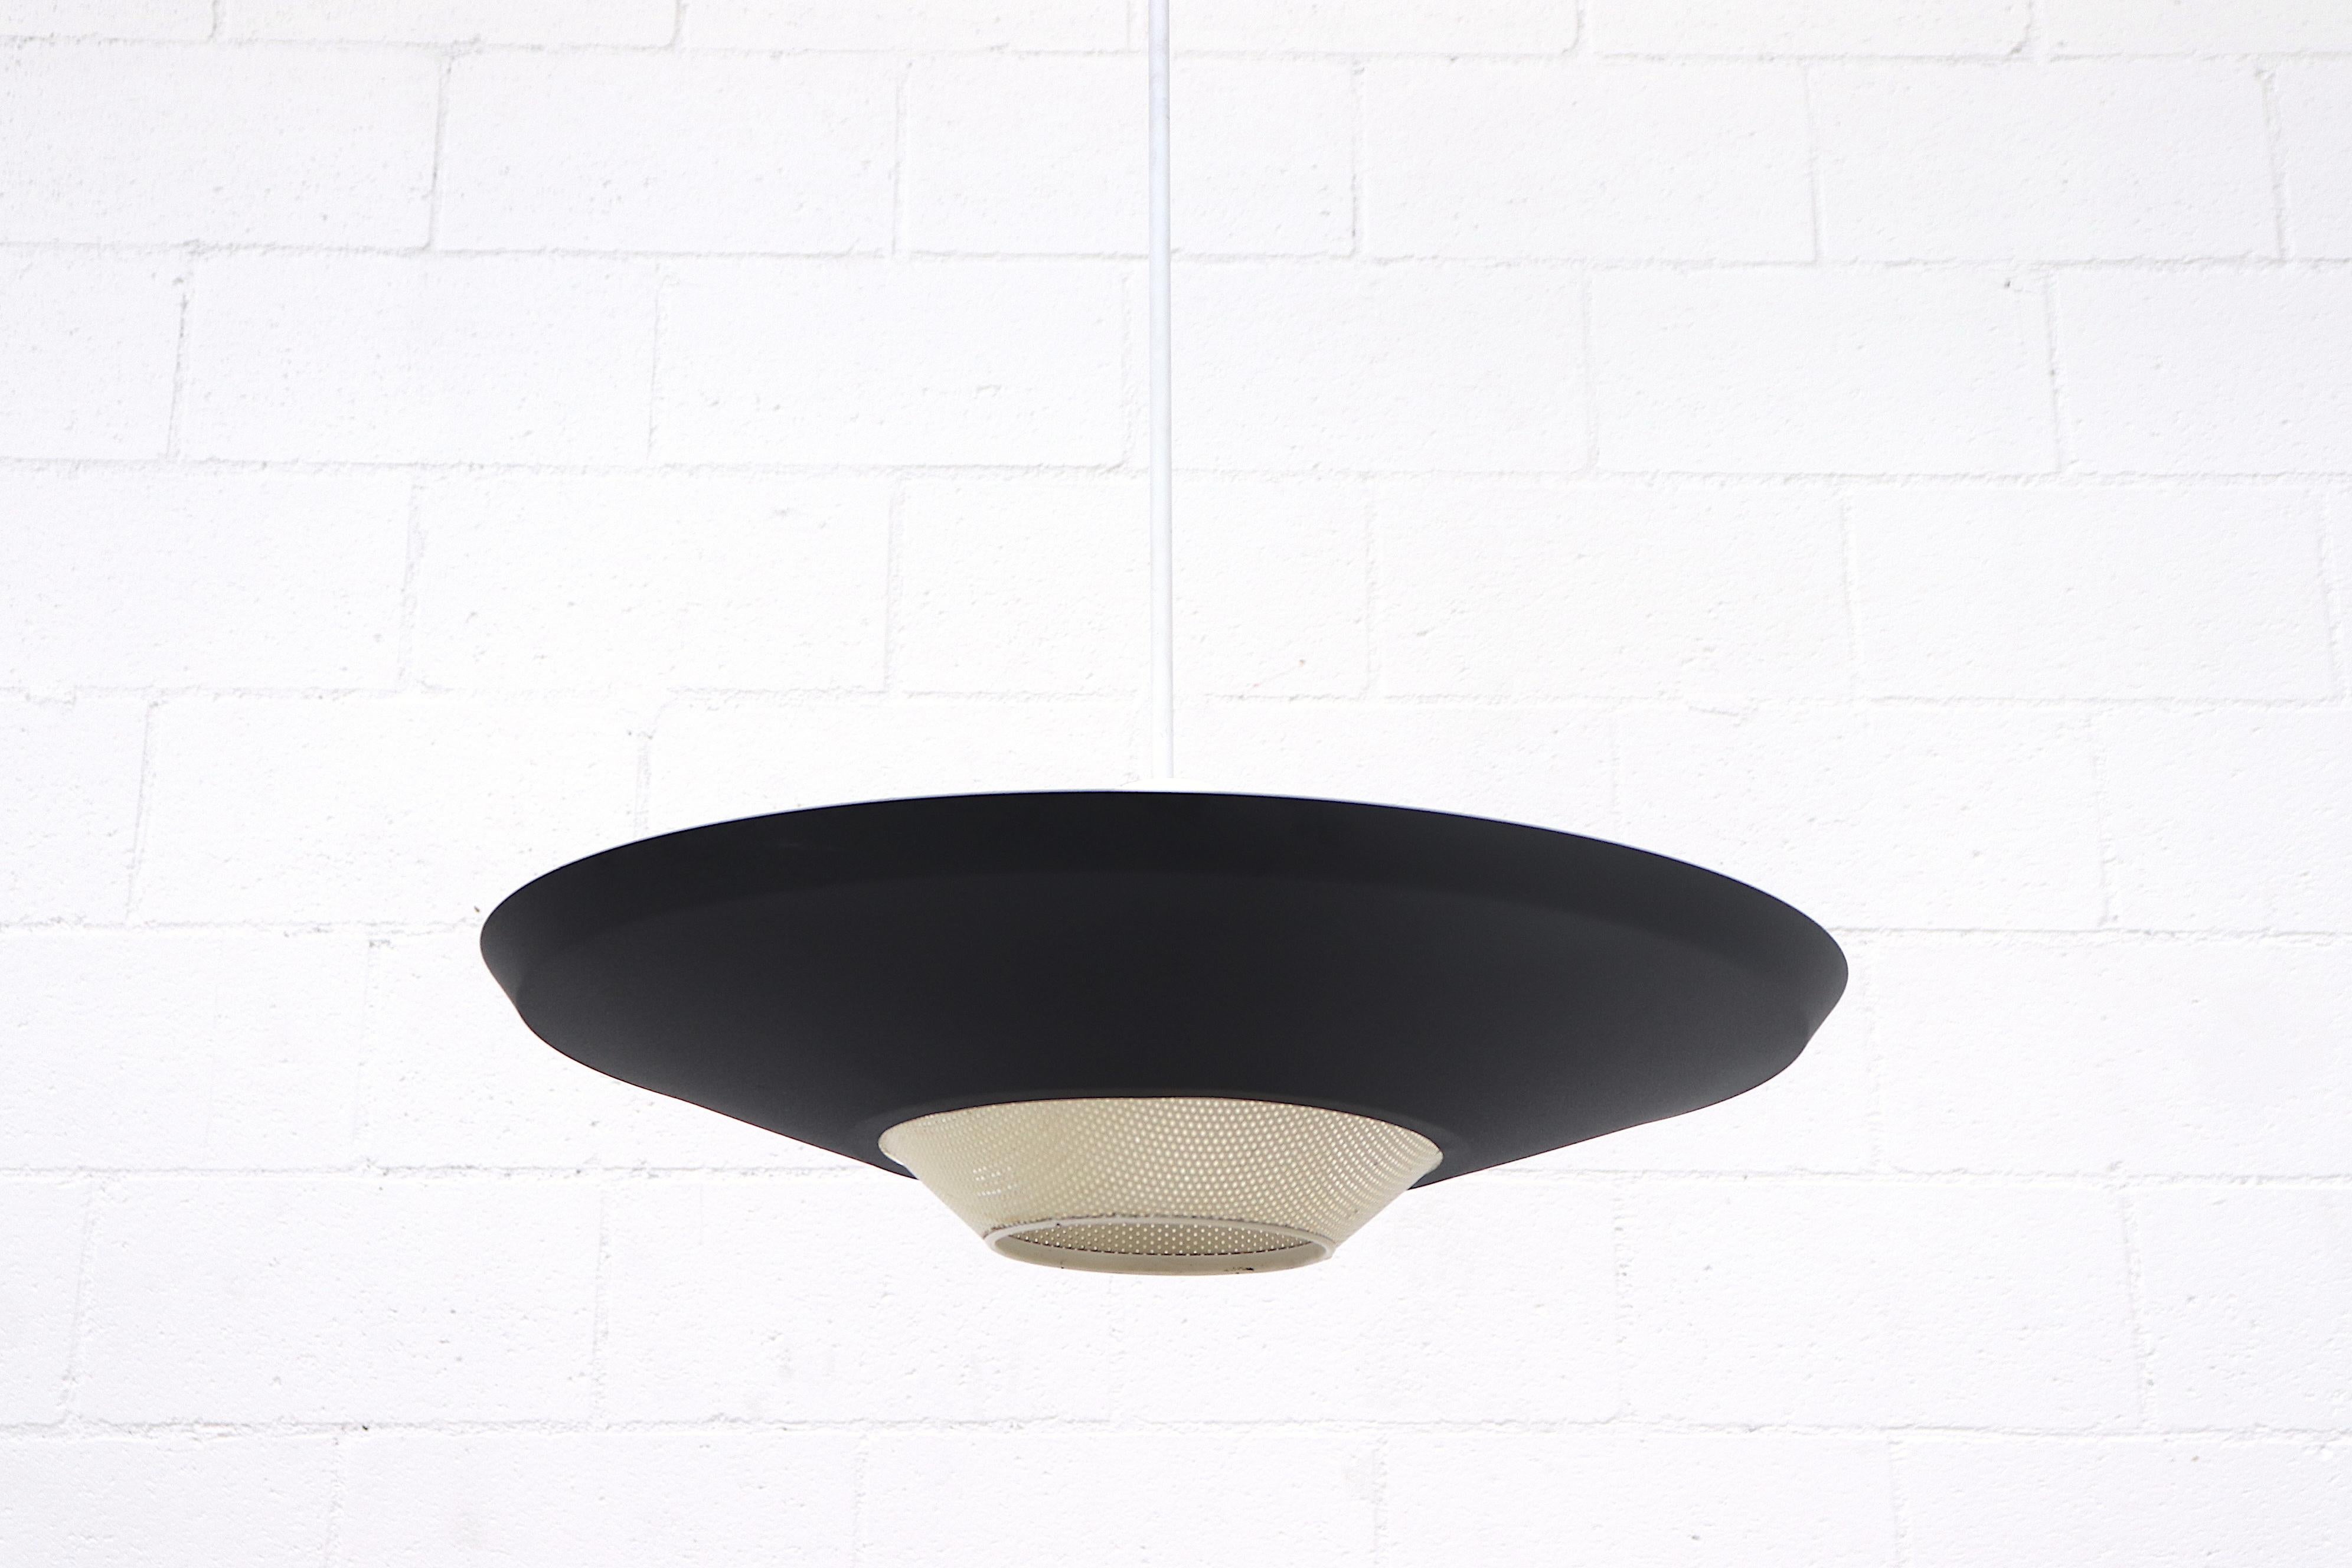 Original black enameled metal Rondelle ceiling pendant. Black enameled shade with perforated bone white accent. Triple light sockets for up-lighting and a single spot for down-lighting. In original condition with wear consistent with its age and use.